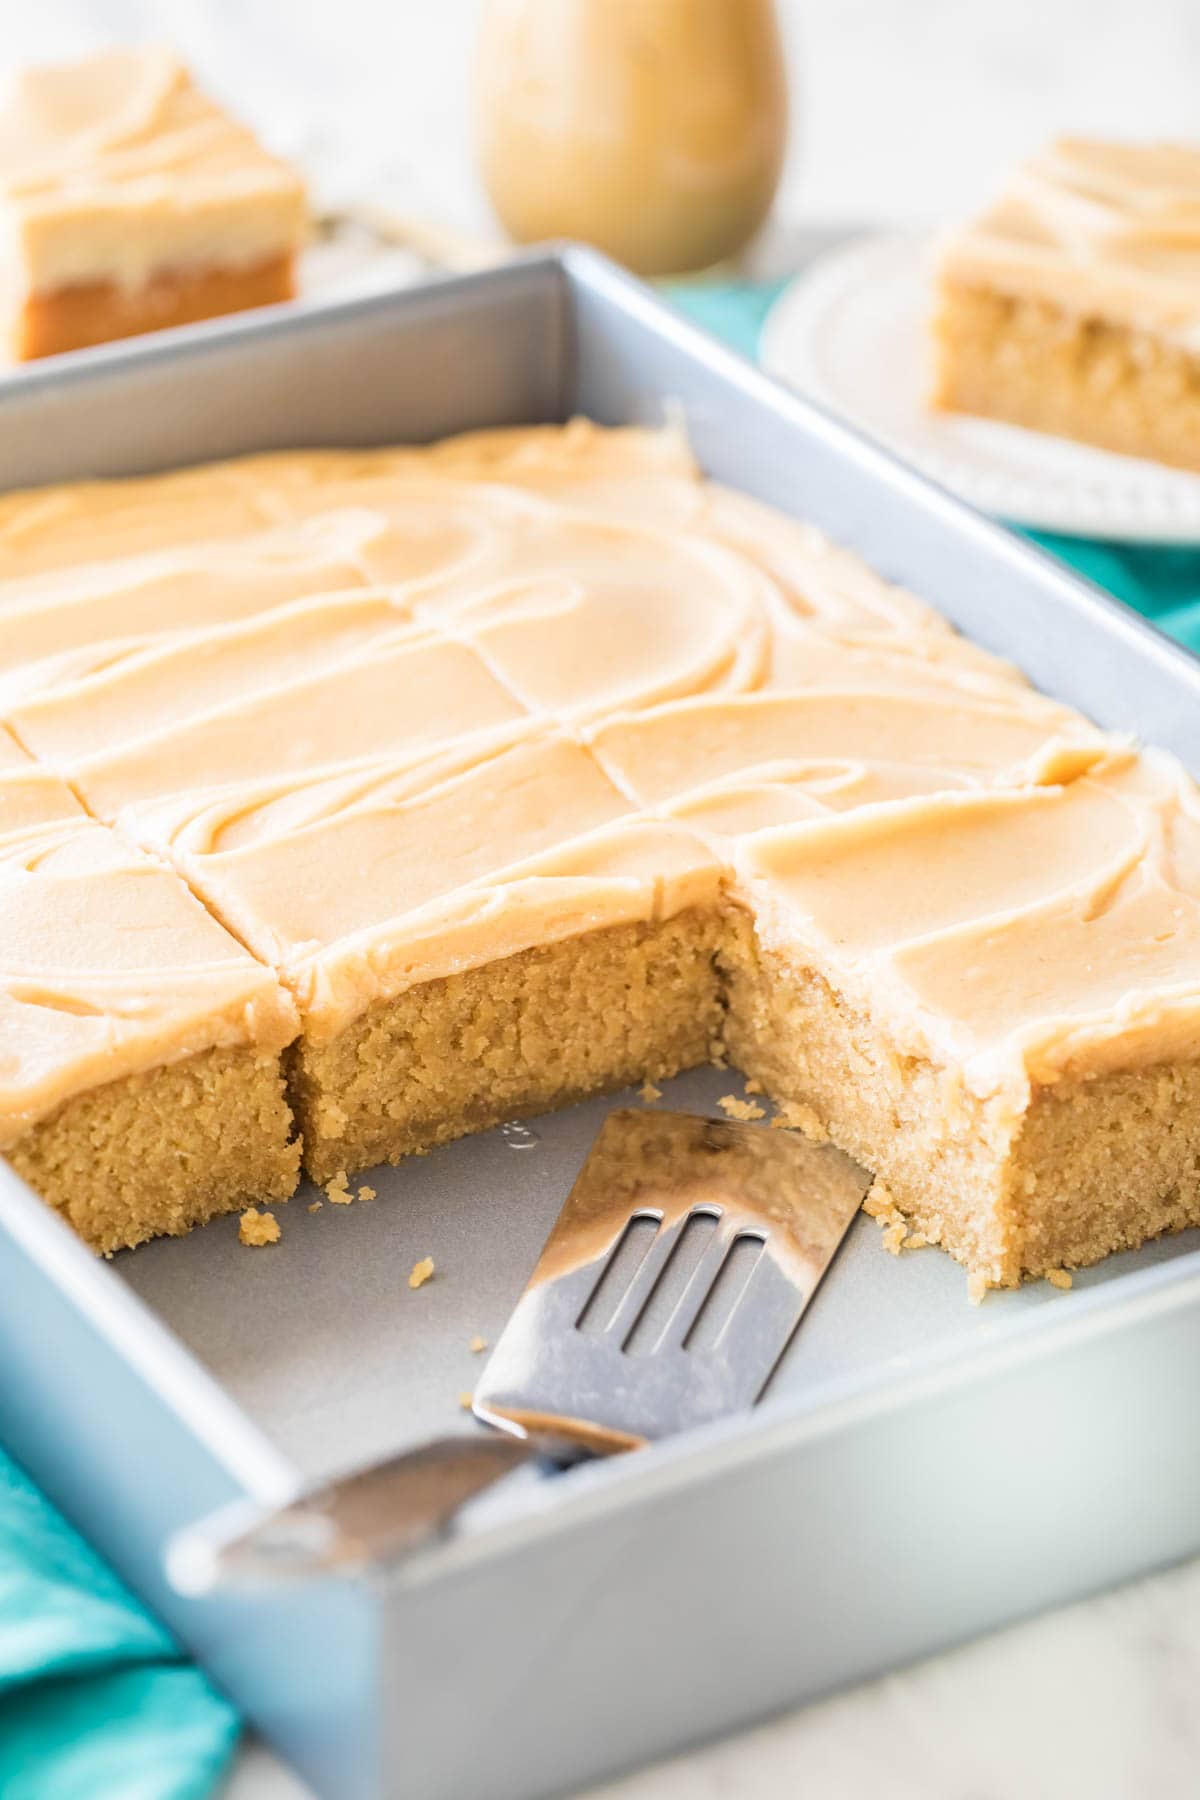 Peanut butter sheet cake that's been frosted and sliced in its pan.